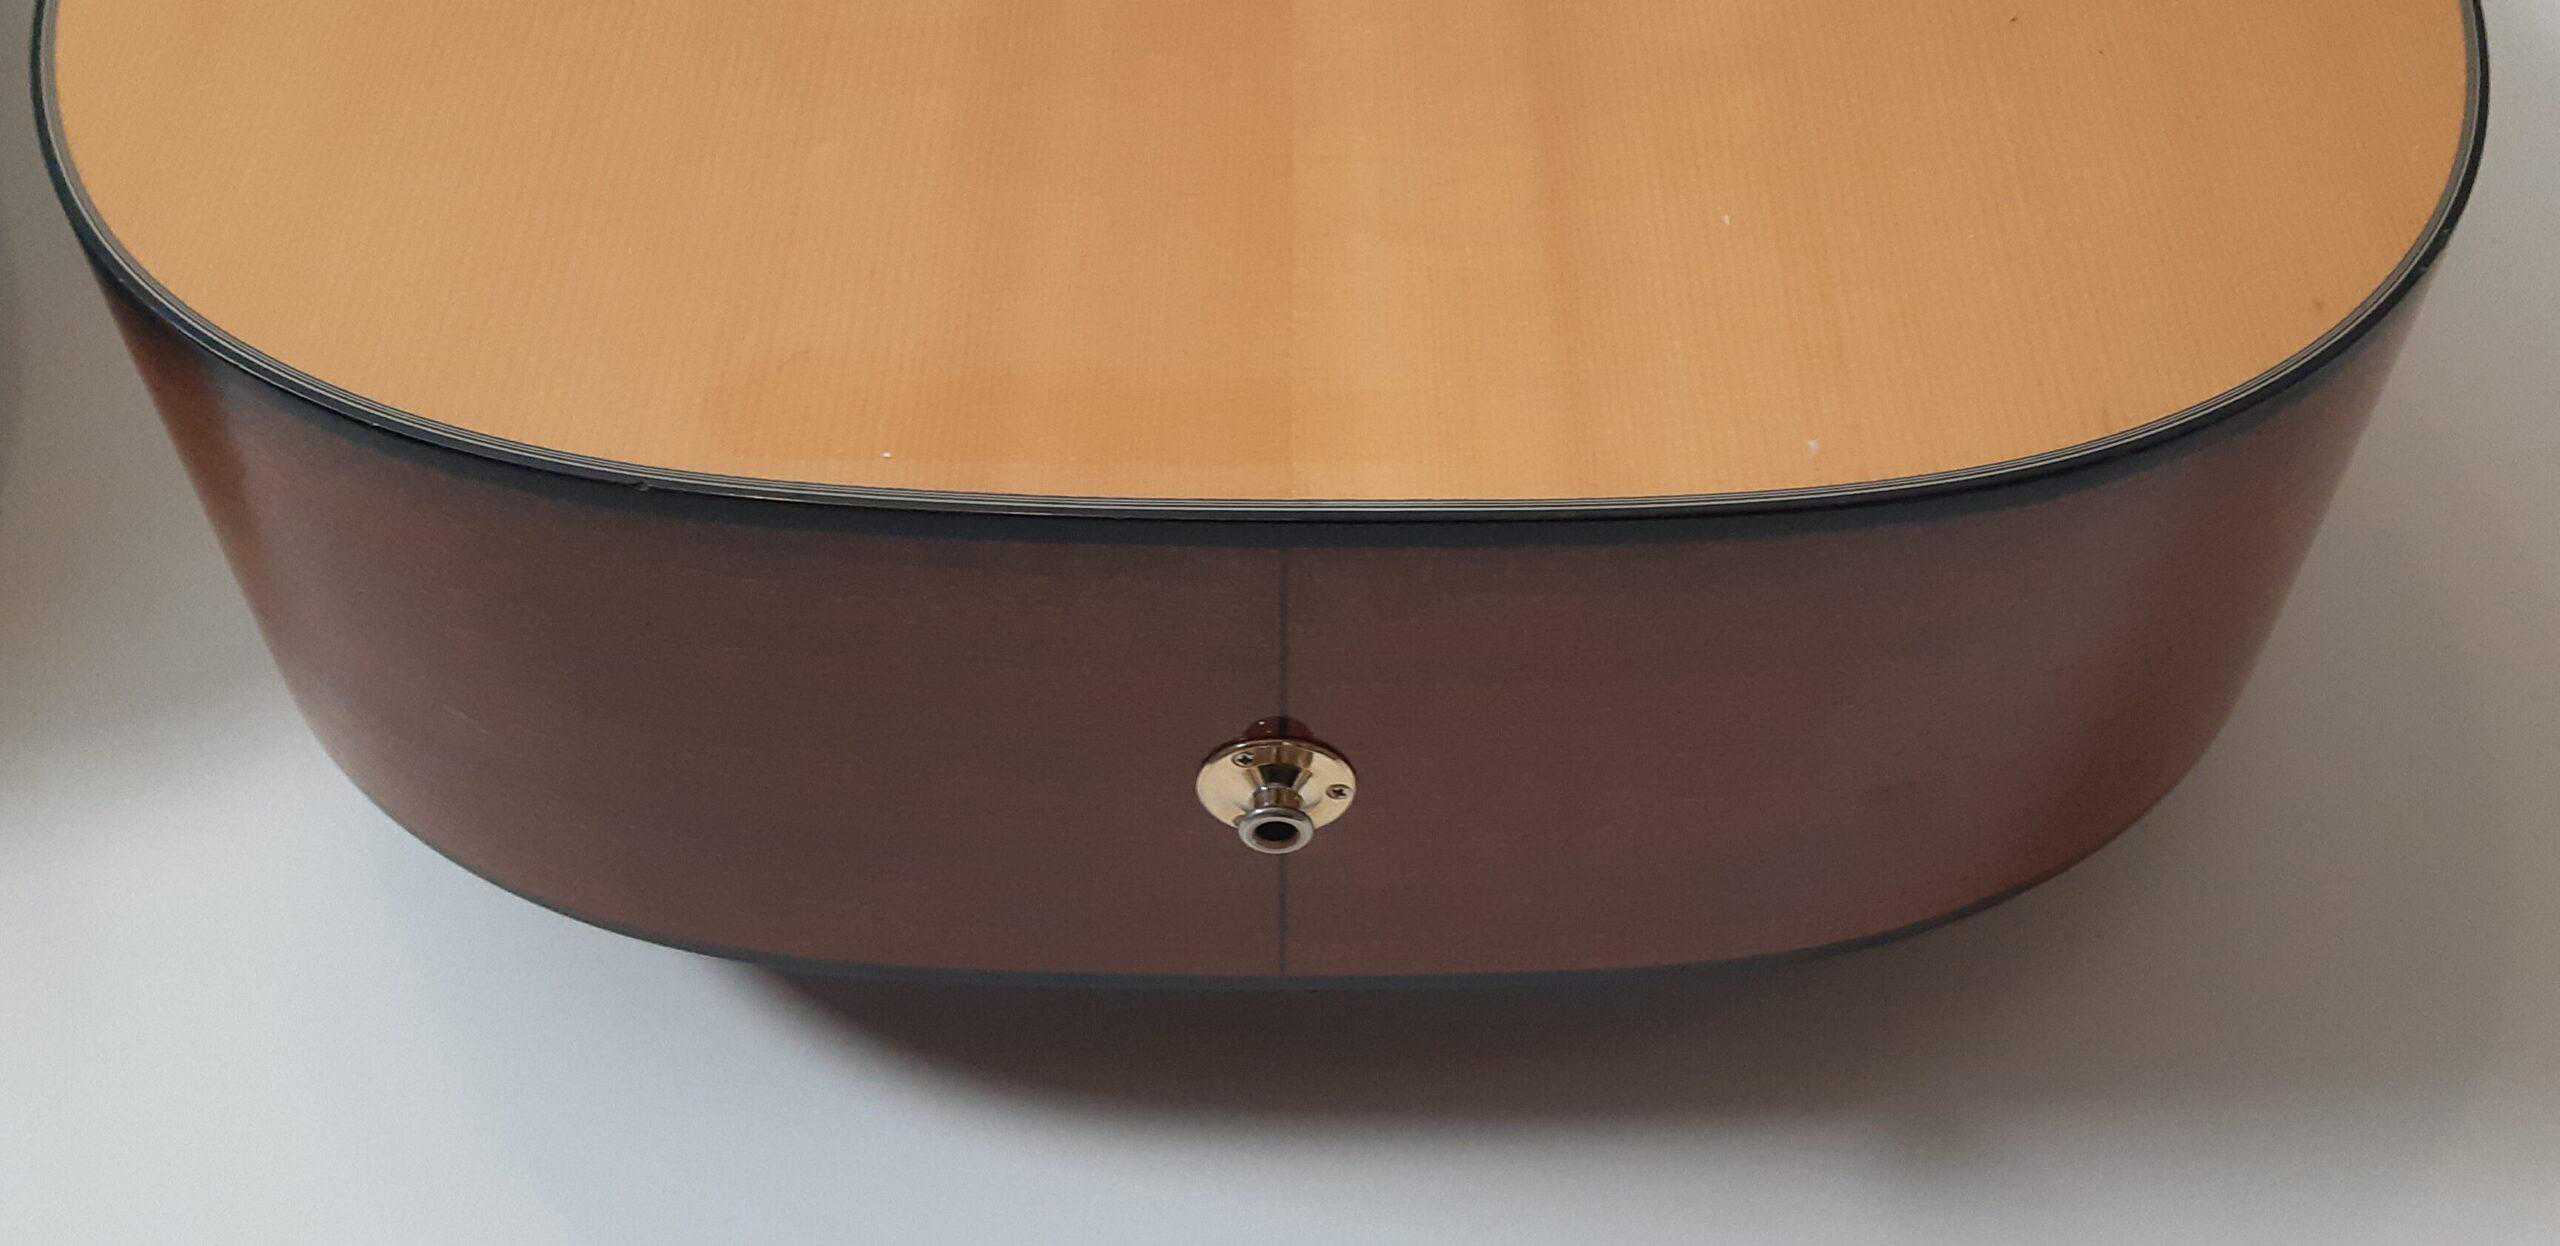 The strap button on an acoustic guitar